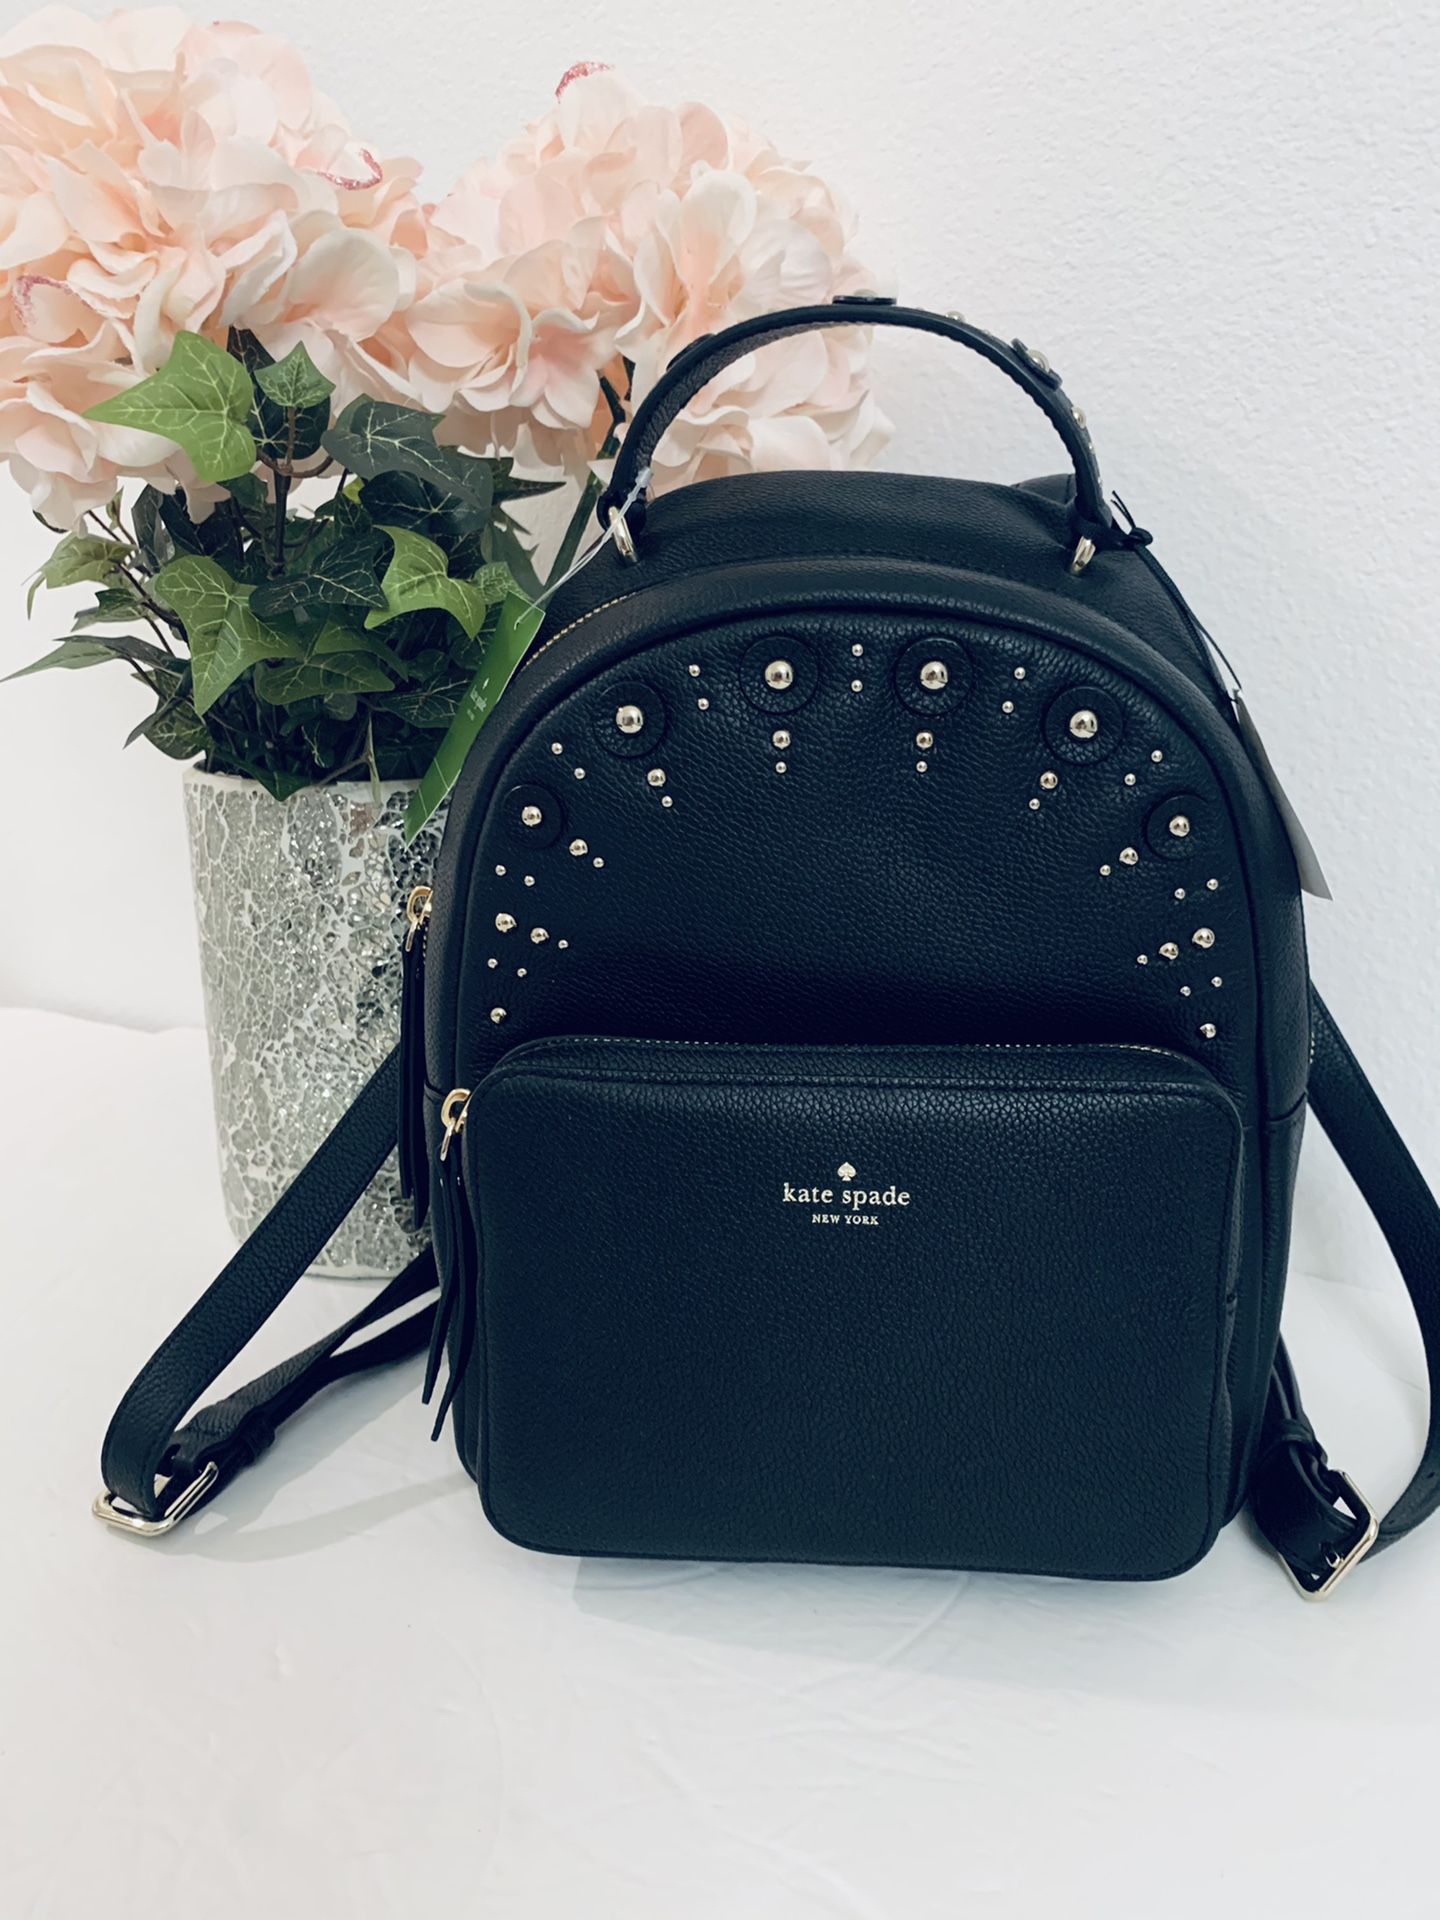 Kate Spade dawn Studded Leather backpack Nicole Medium Black. Condition is "New with tags" Backpack